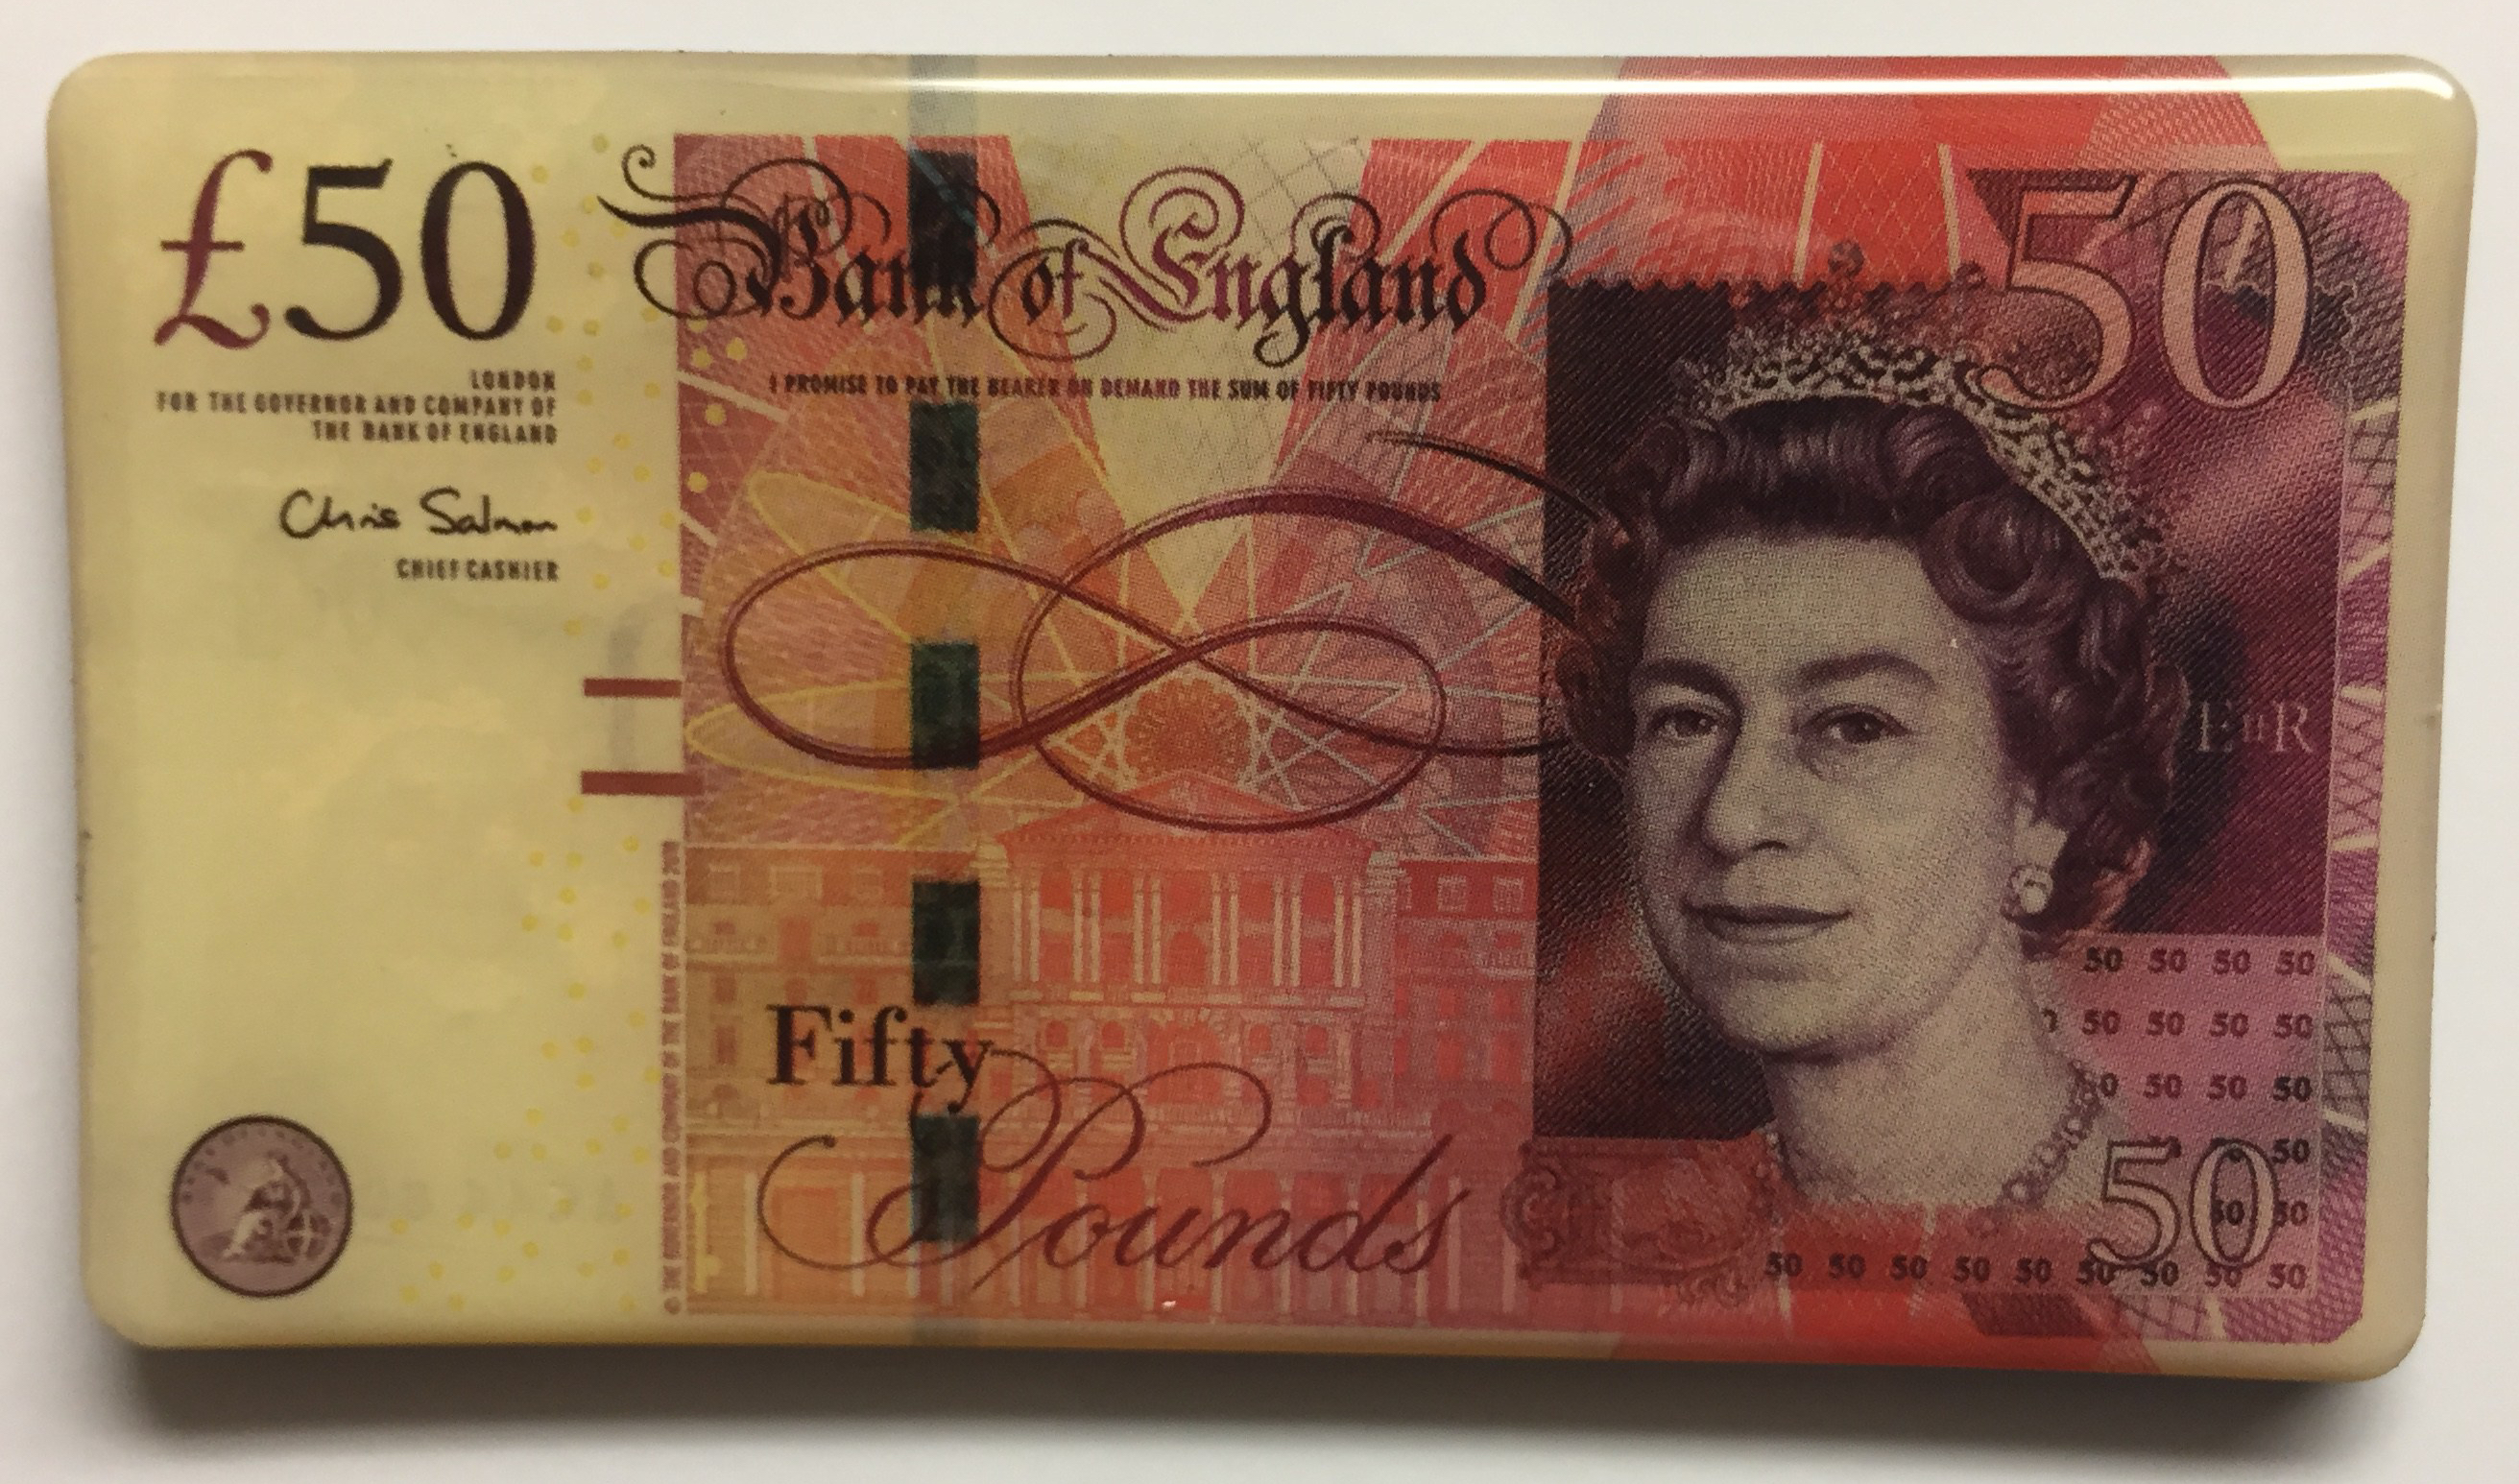 Fridge magnet that looks like a 50 pound note.